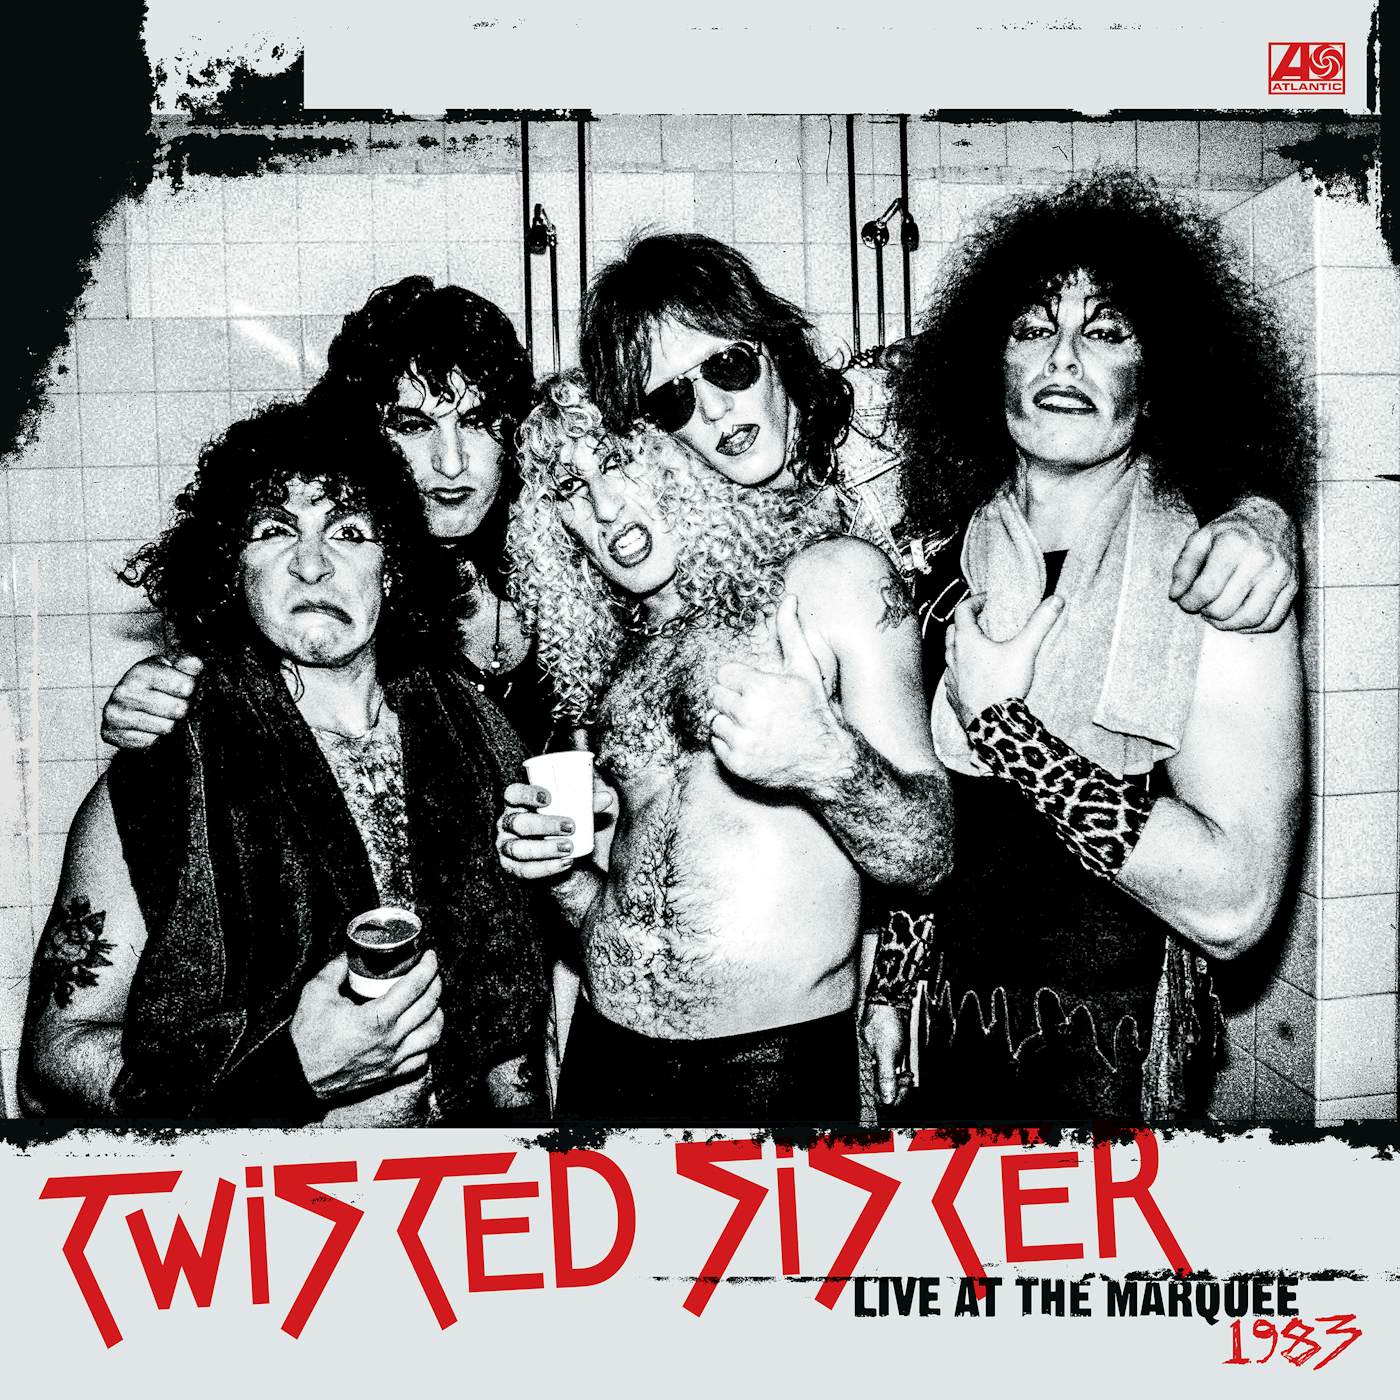 Twisted Sister LIVE AT THE MARQUEE 1983 (RSC 2018 EXCLUSIVE) Vinyl Record